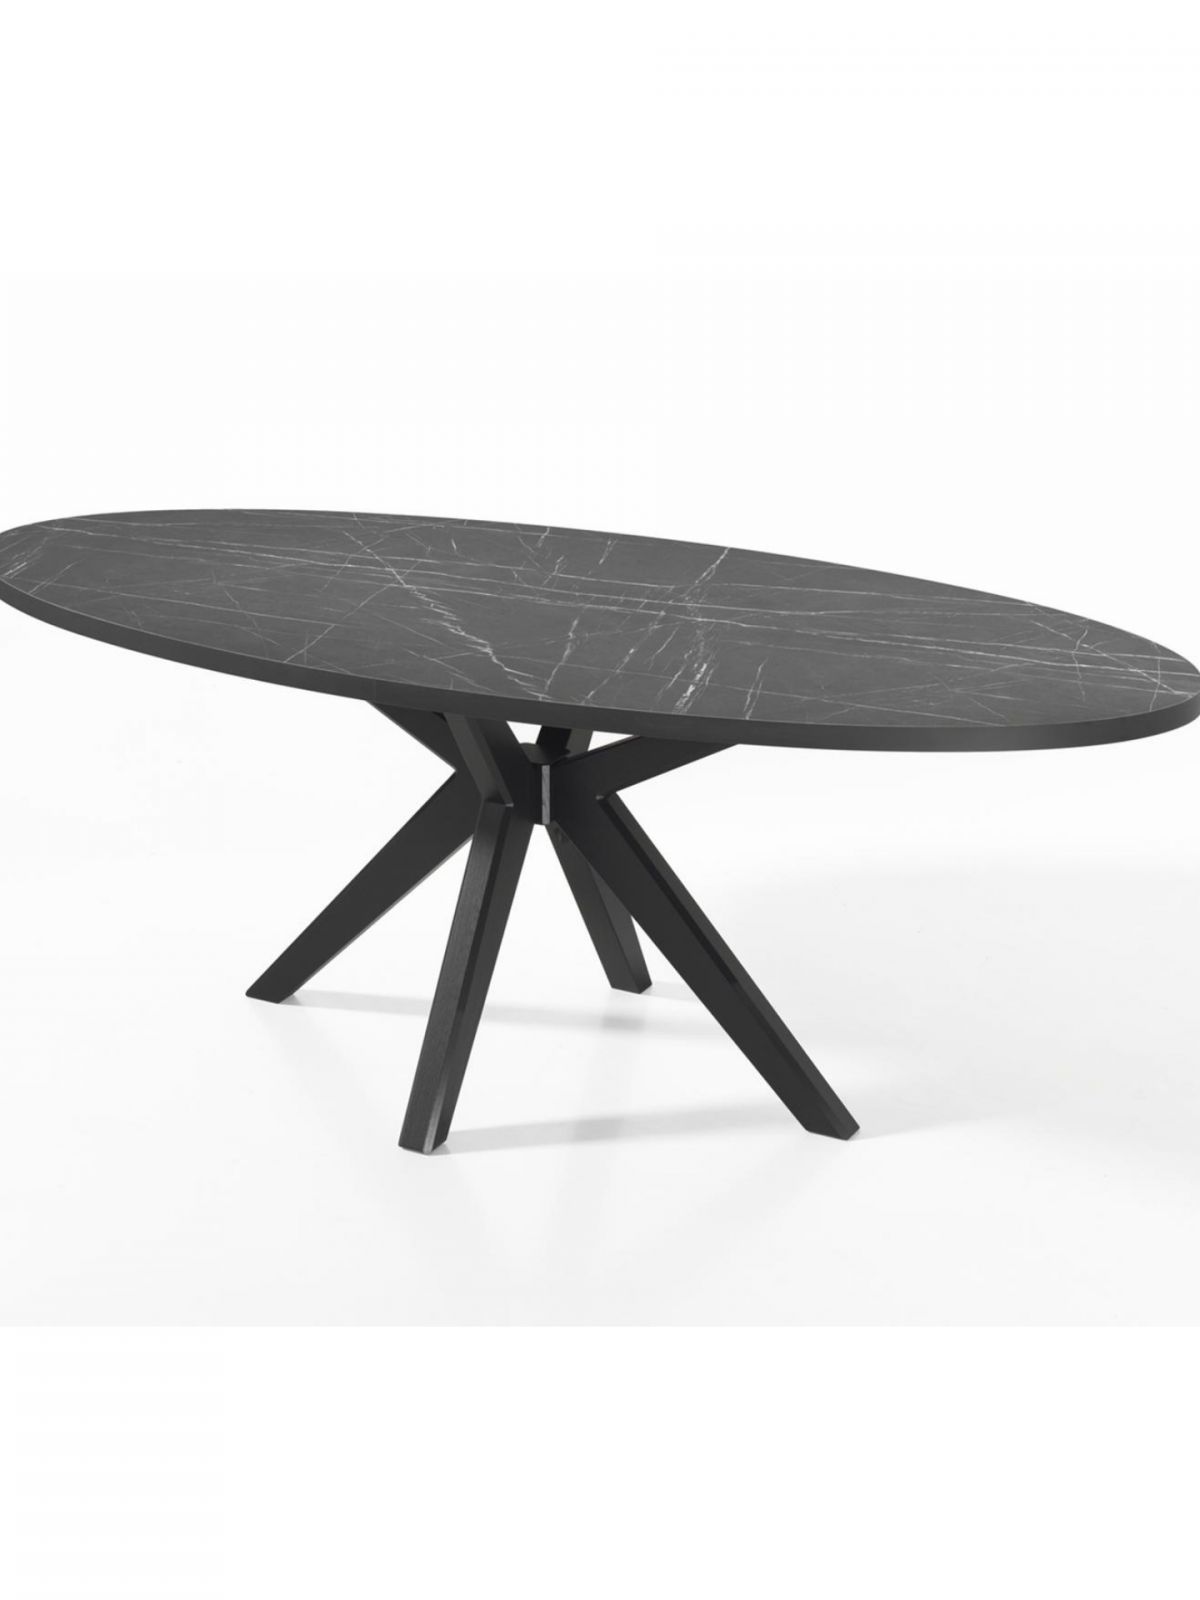 Table ovale fixe 2,20m x-pied massif